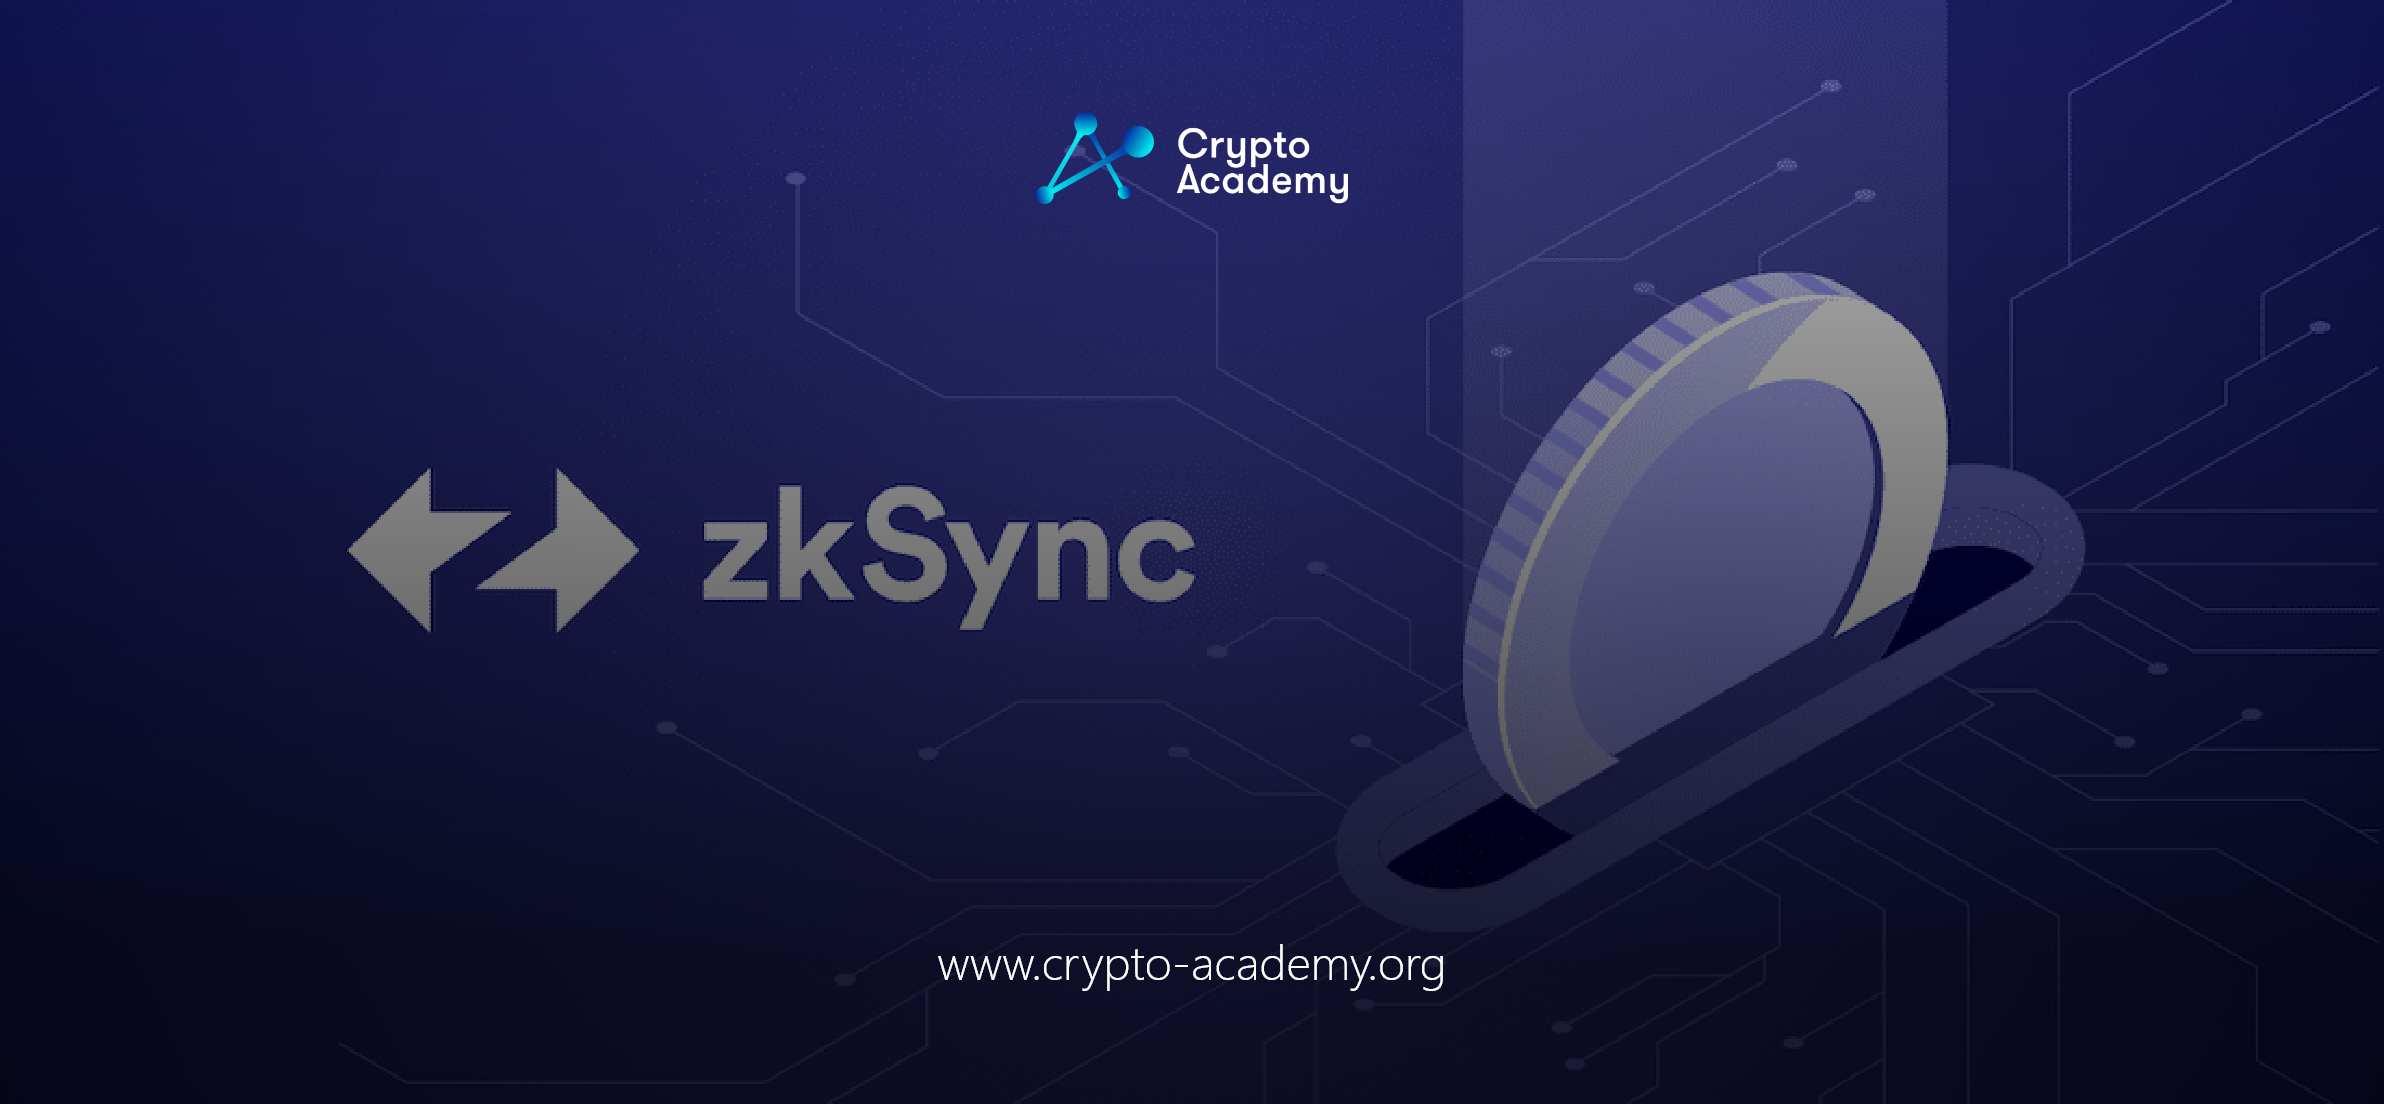 Block Production Stall on zkSync Era Network Due to Software Glitch